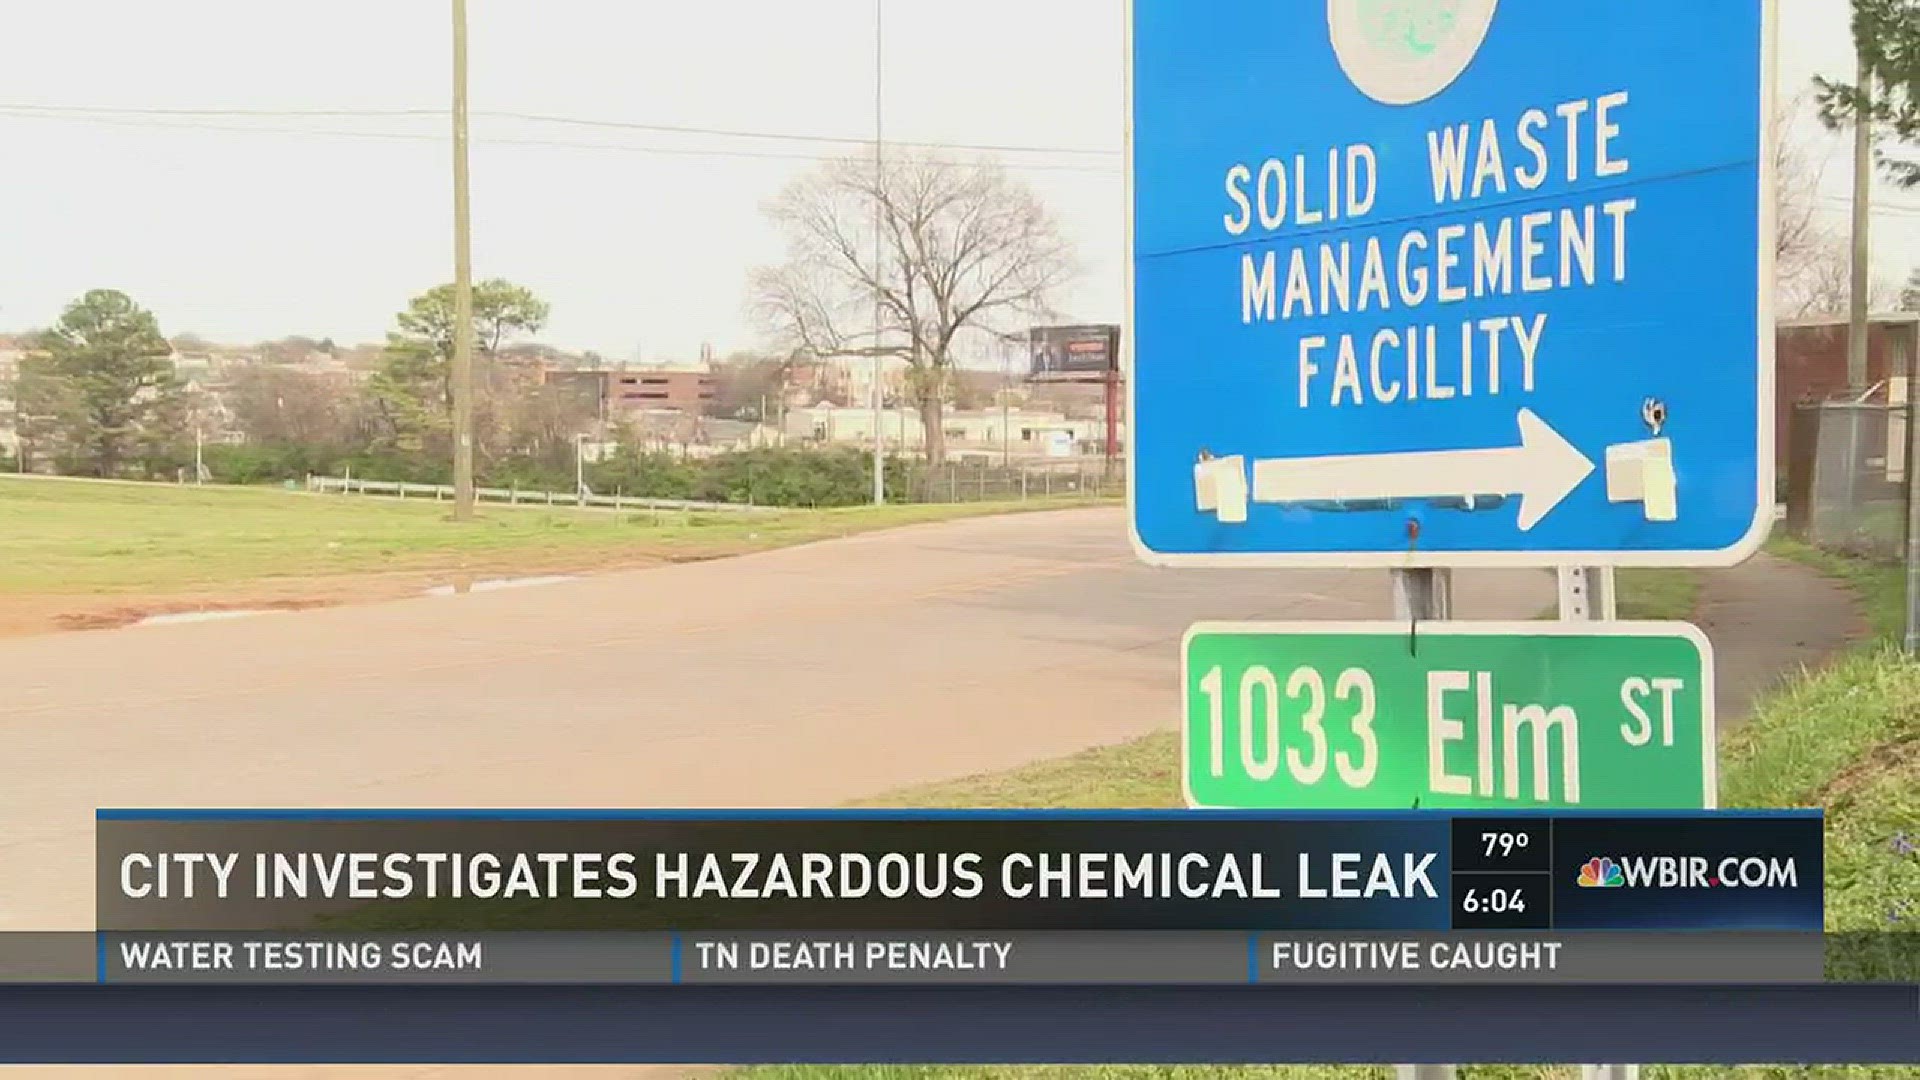 March 30, 2017: City leaders in Knoxville shut down a waste management center after a hazmat scare.